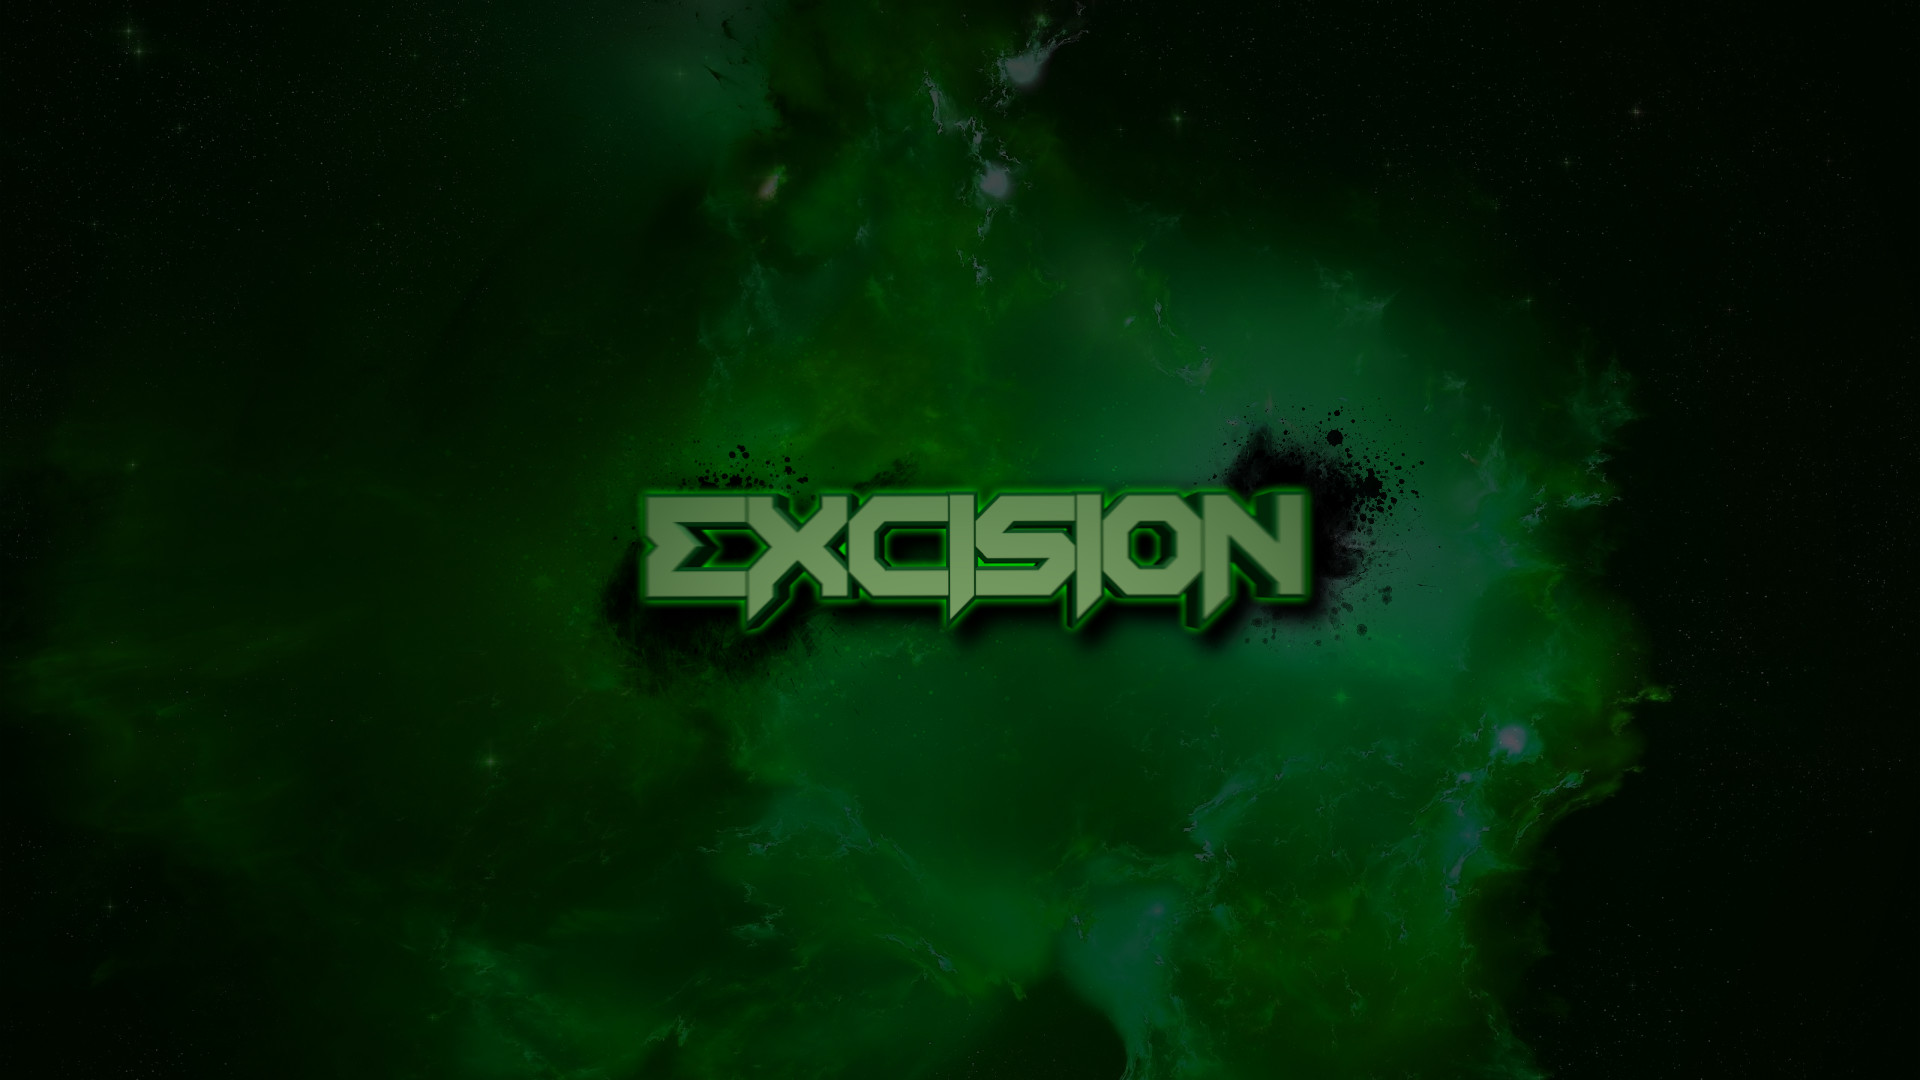 1920x1080 Excision Wallpaper 4 by daridp00 Excision Wallpaper 4 by daridp00